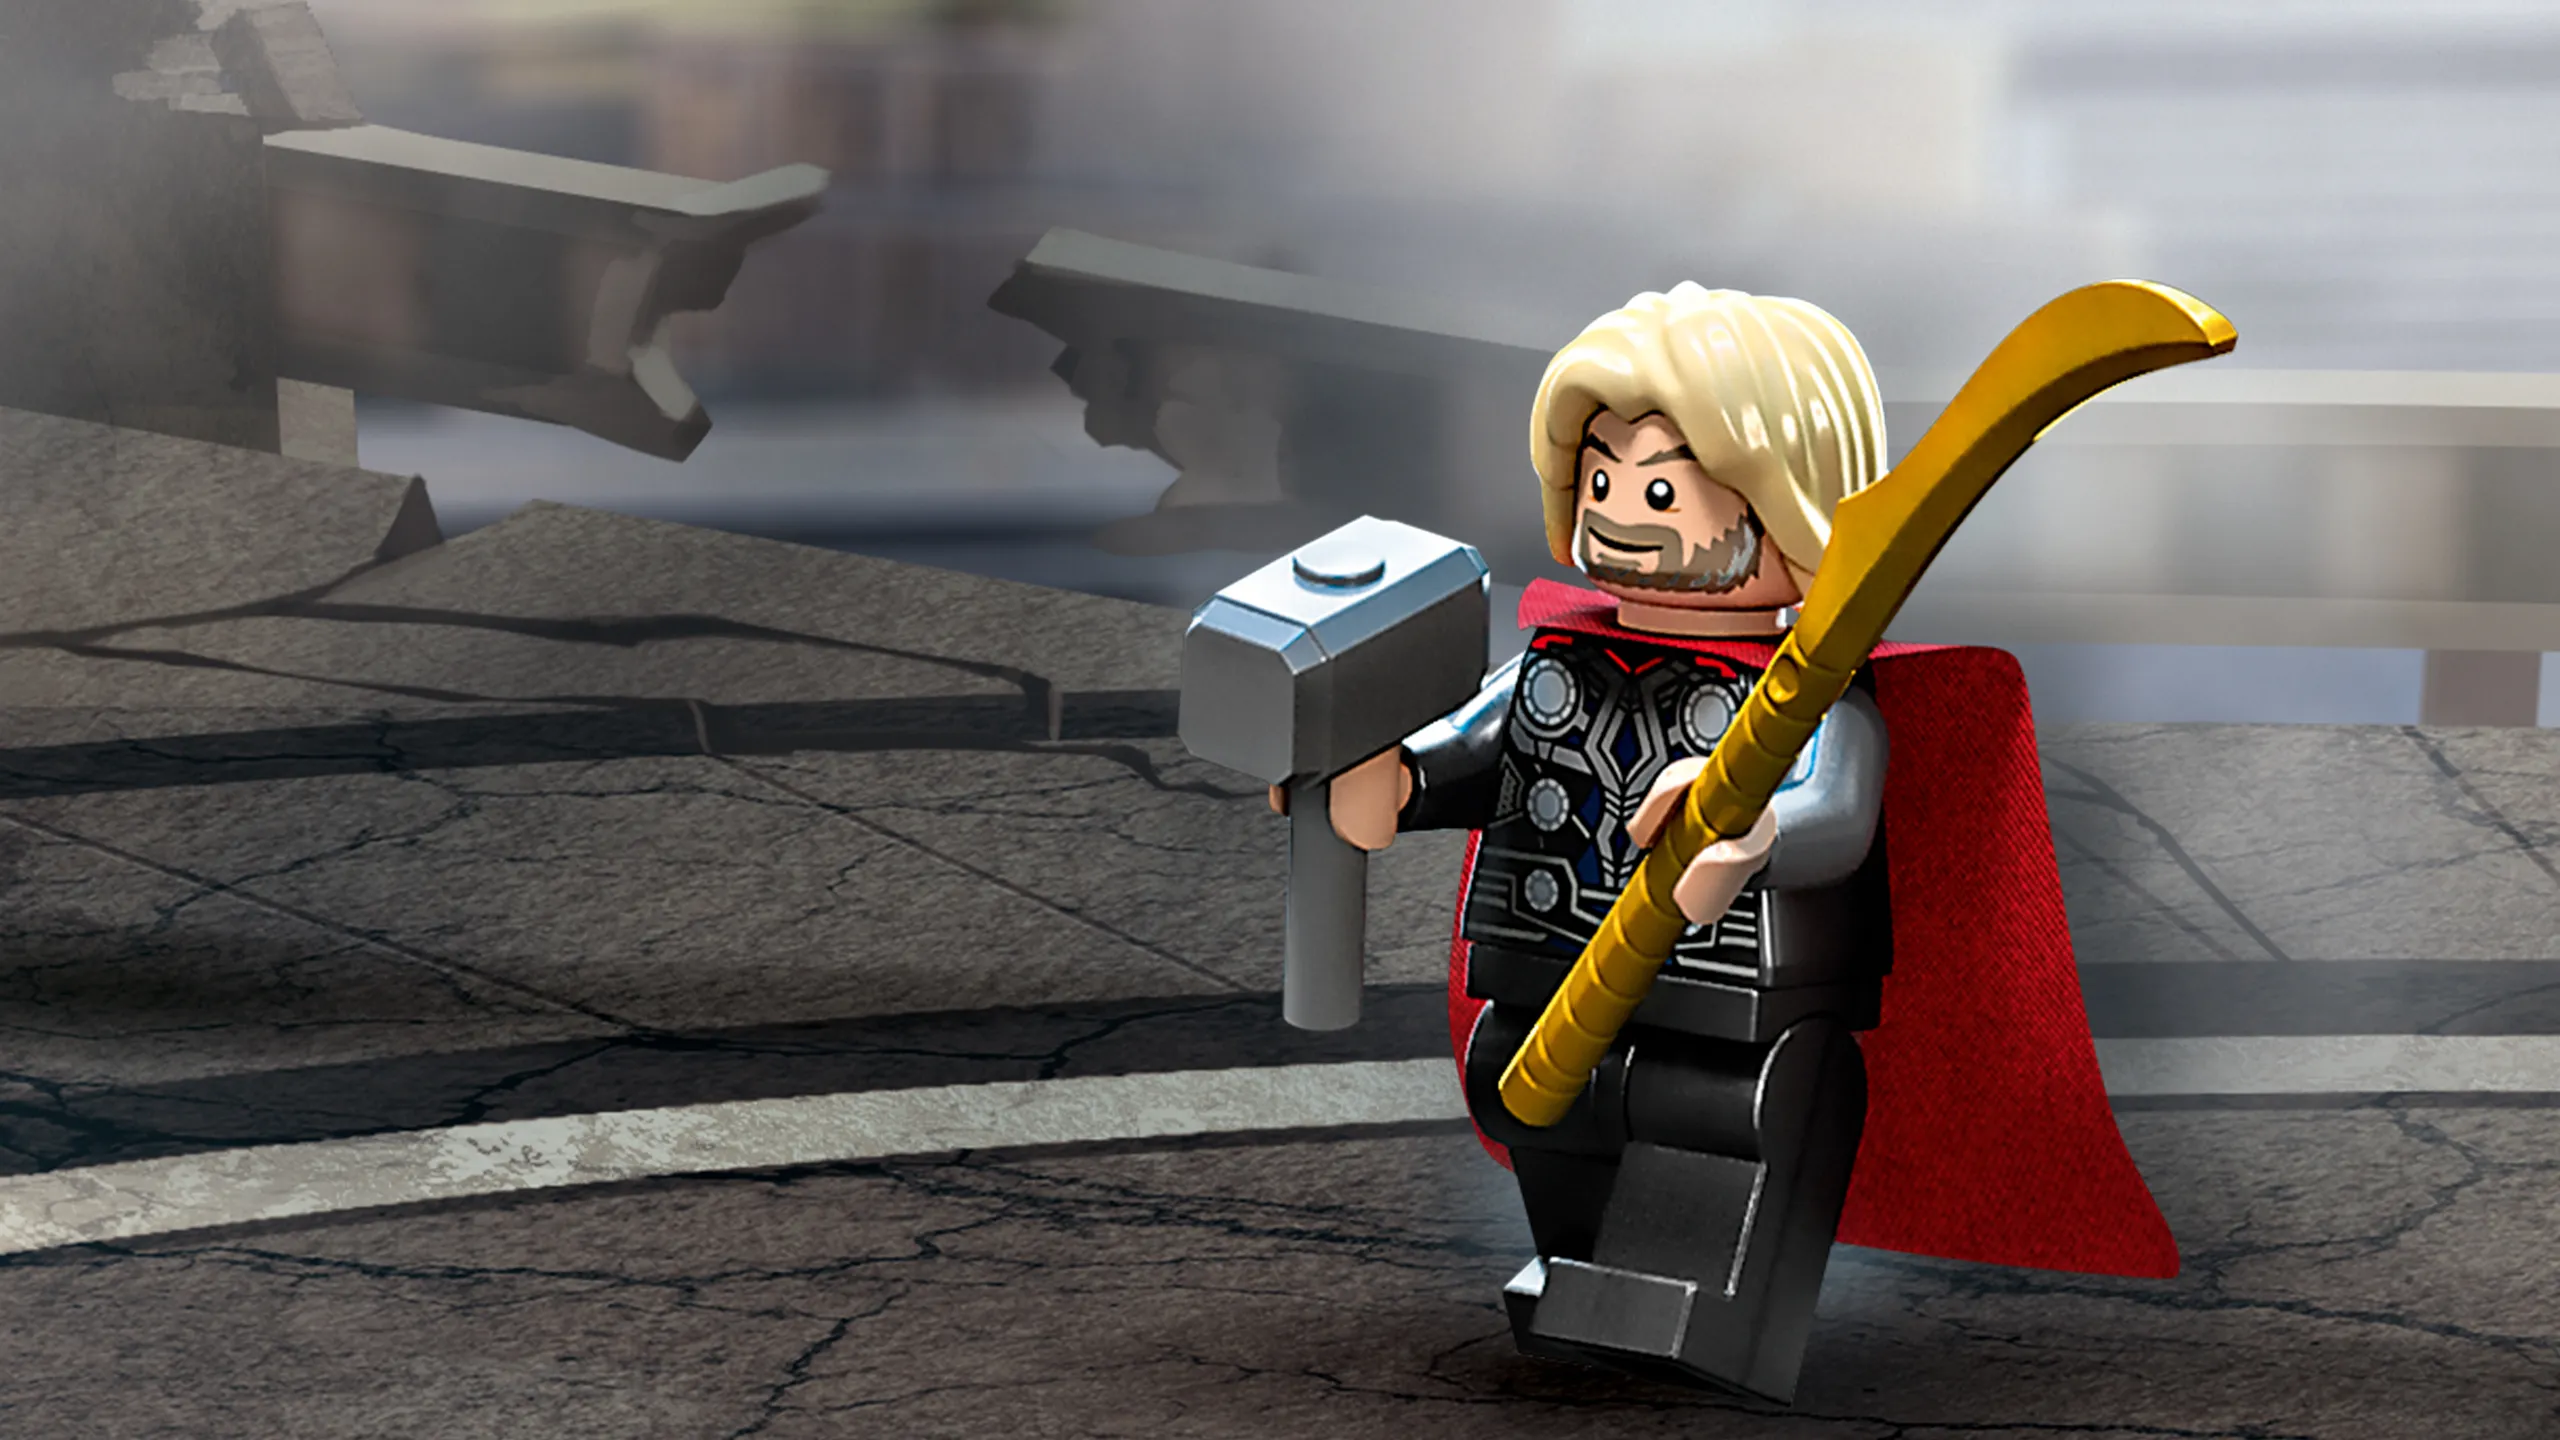 Hero's Sword Life-Sized Replica  Build it Yourself with LEGO